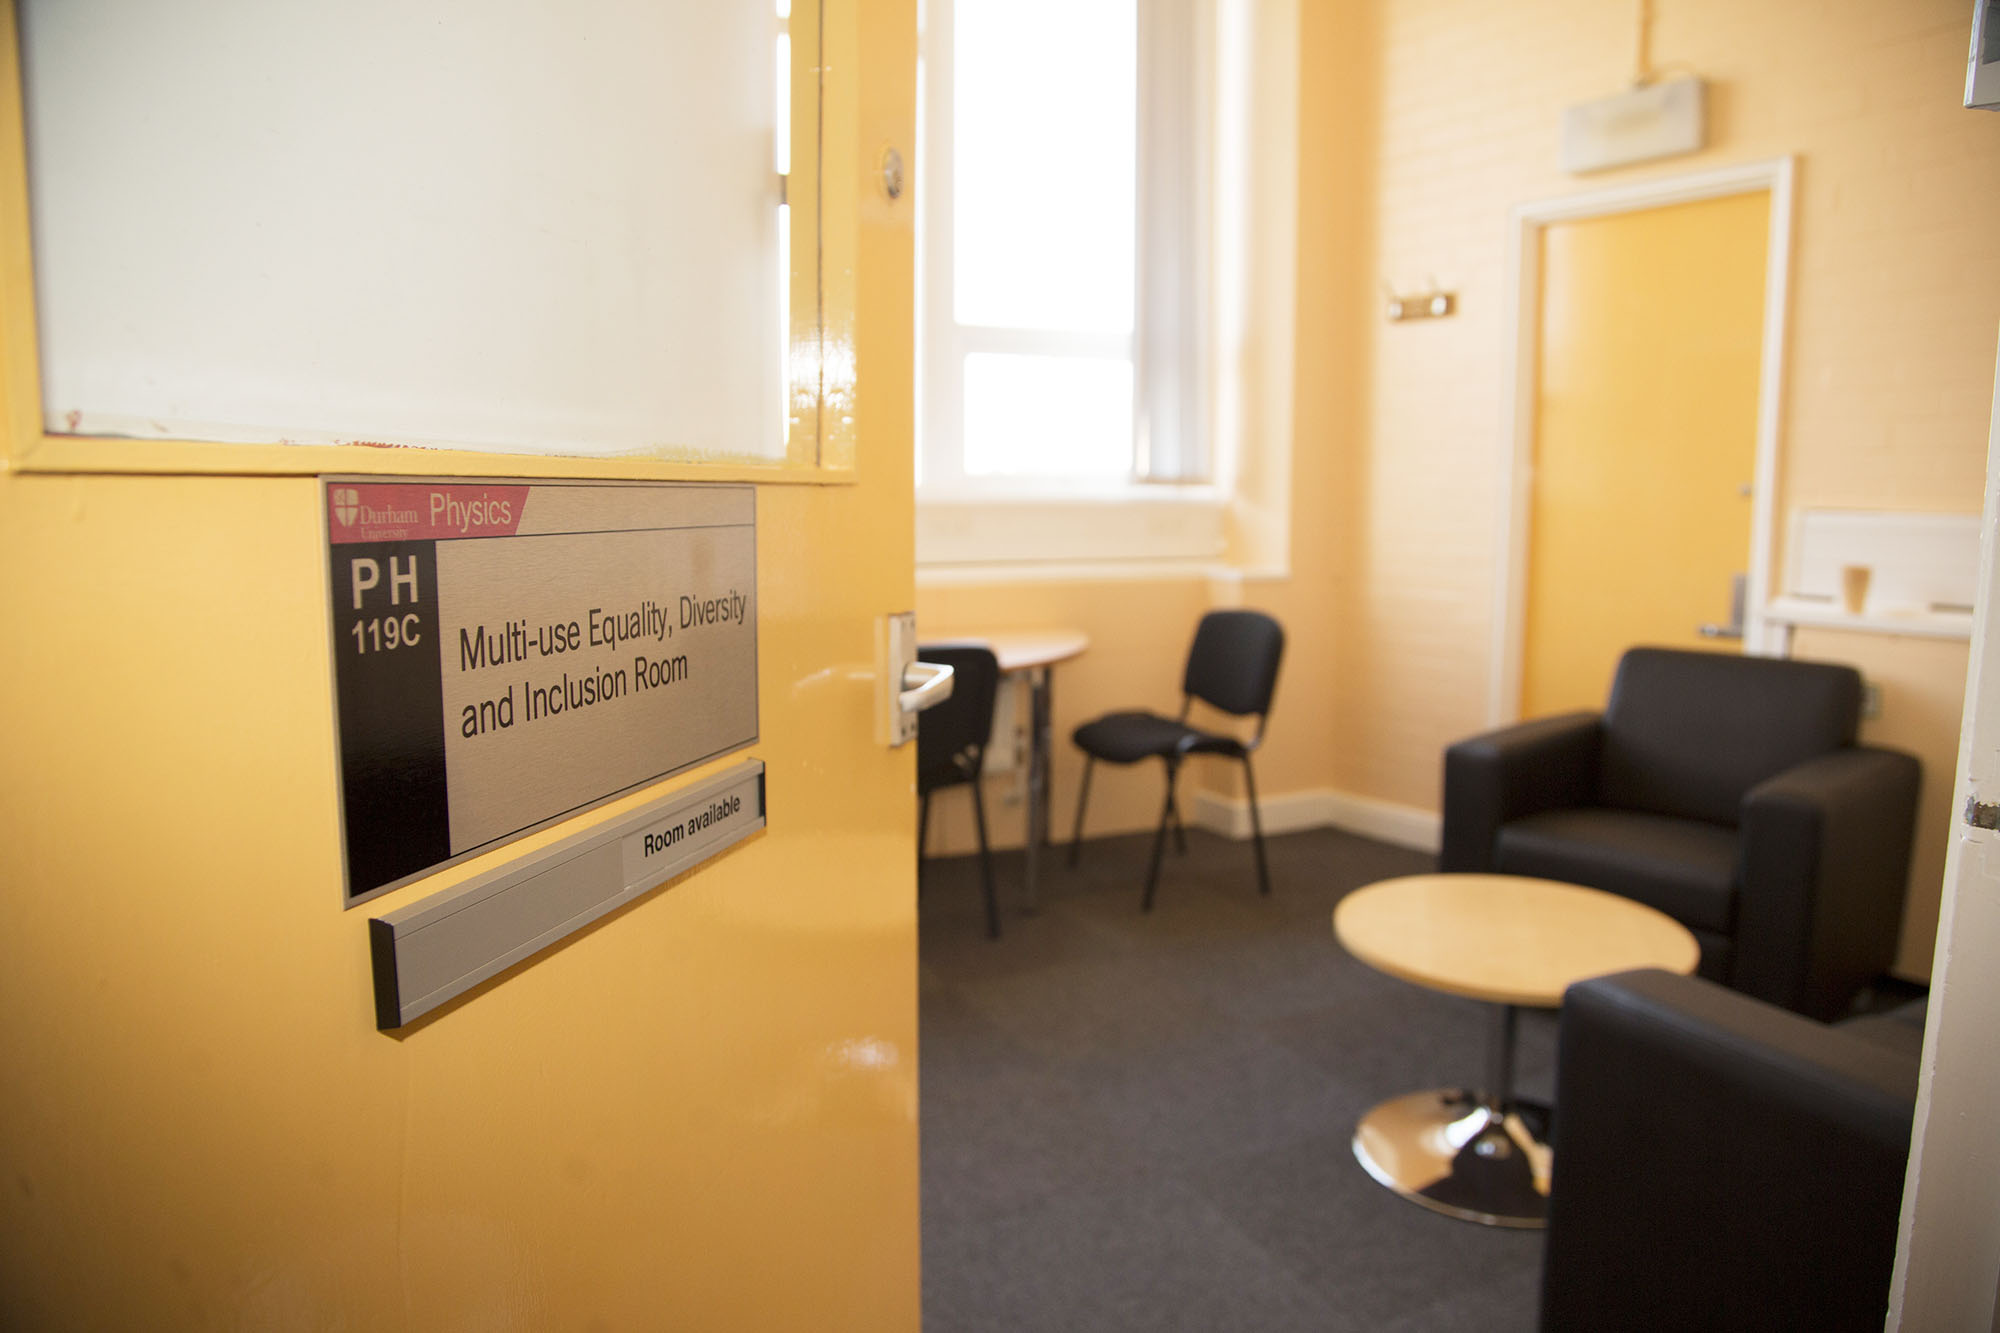 Multi-use Equality, Diversity and Inclusion room